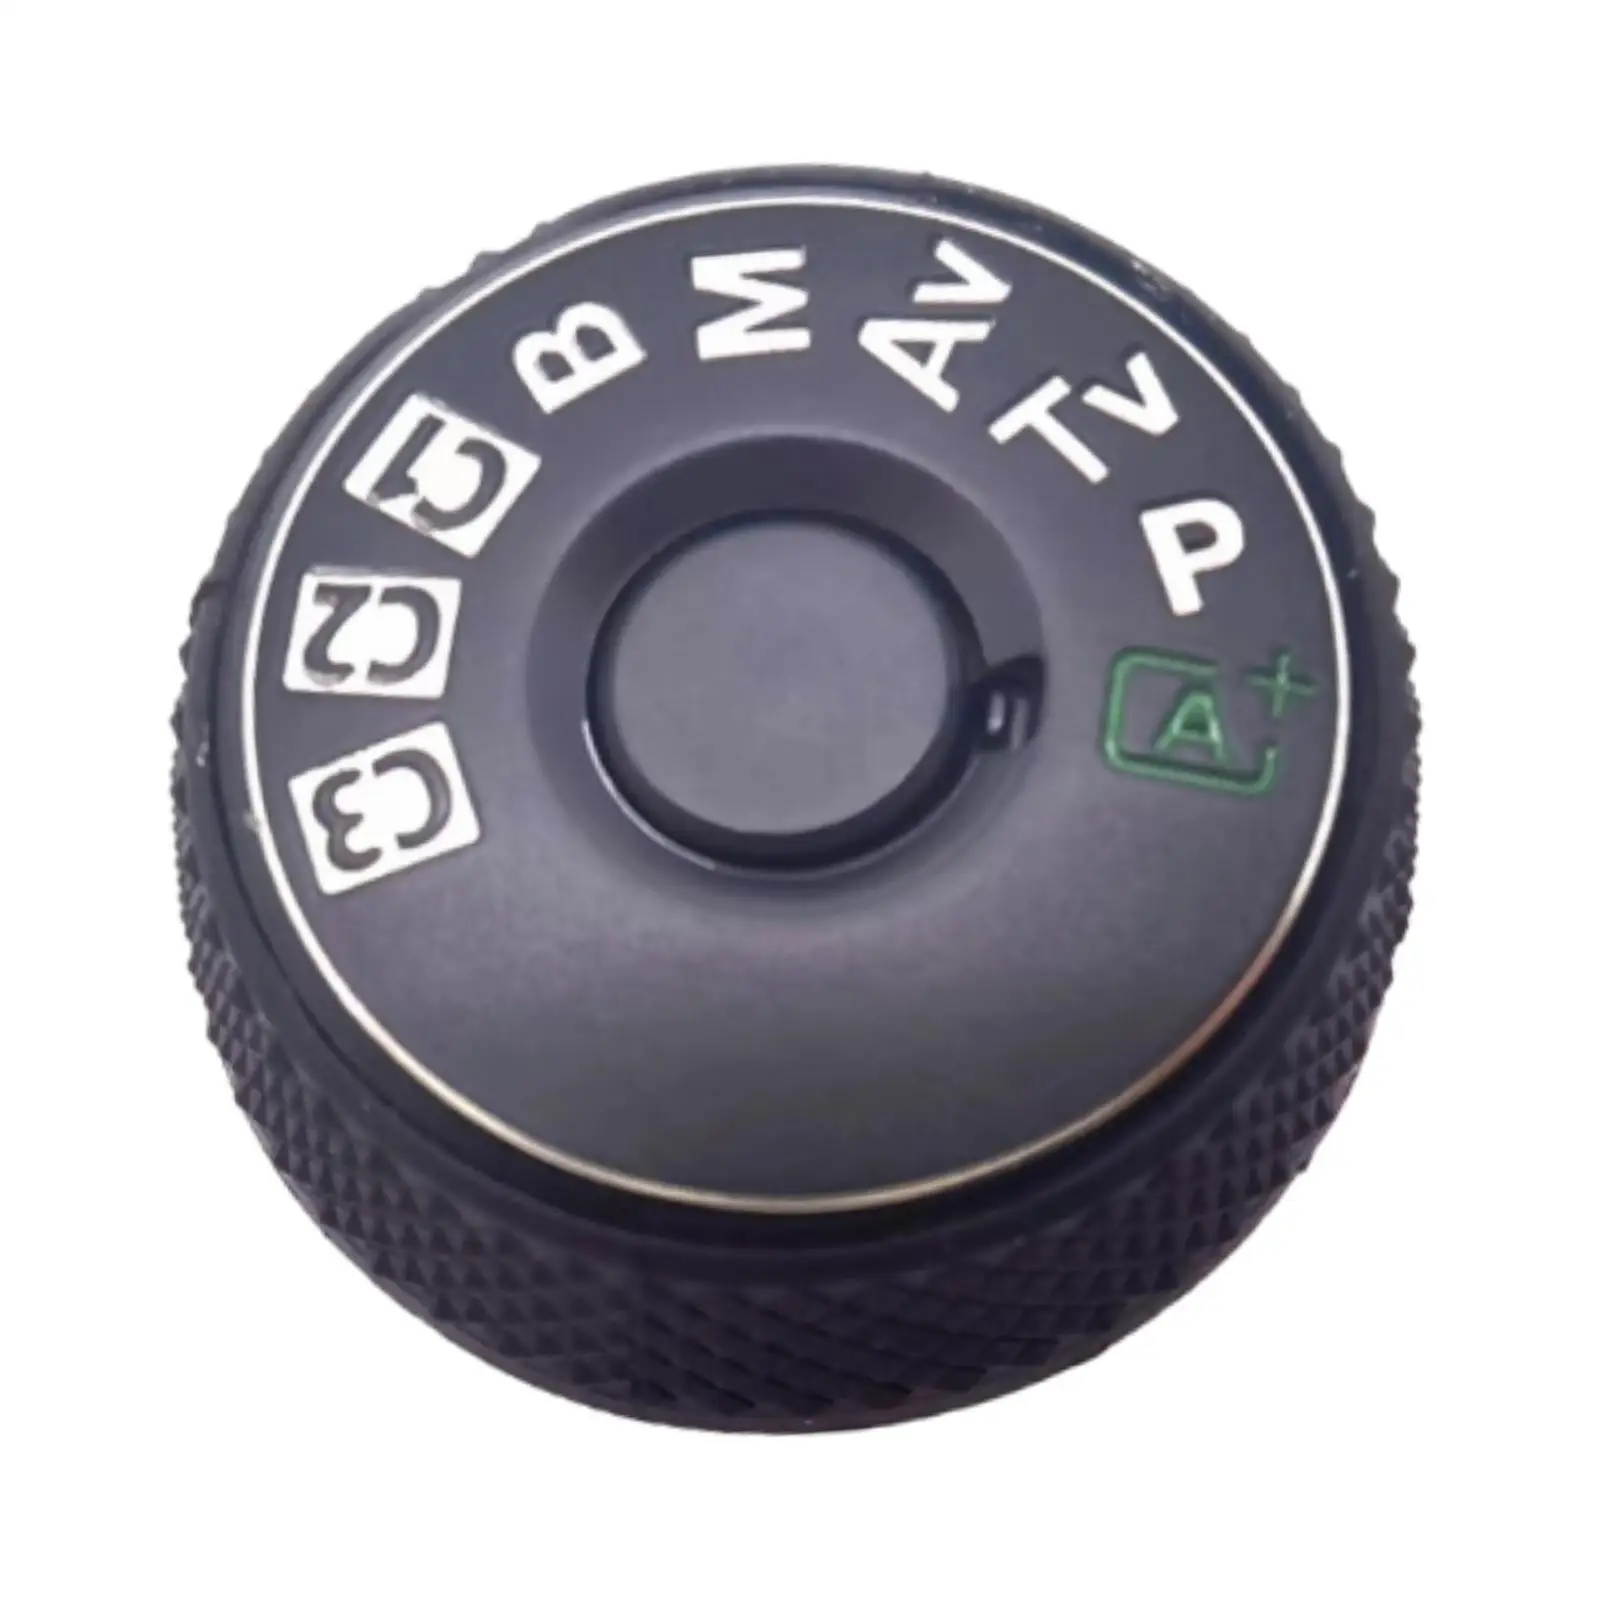 Top Cover Function Dial Model Button Label Digital Camera Repair Part for Canon 5D4 Easy Installation Durable High Reliability